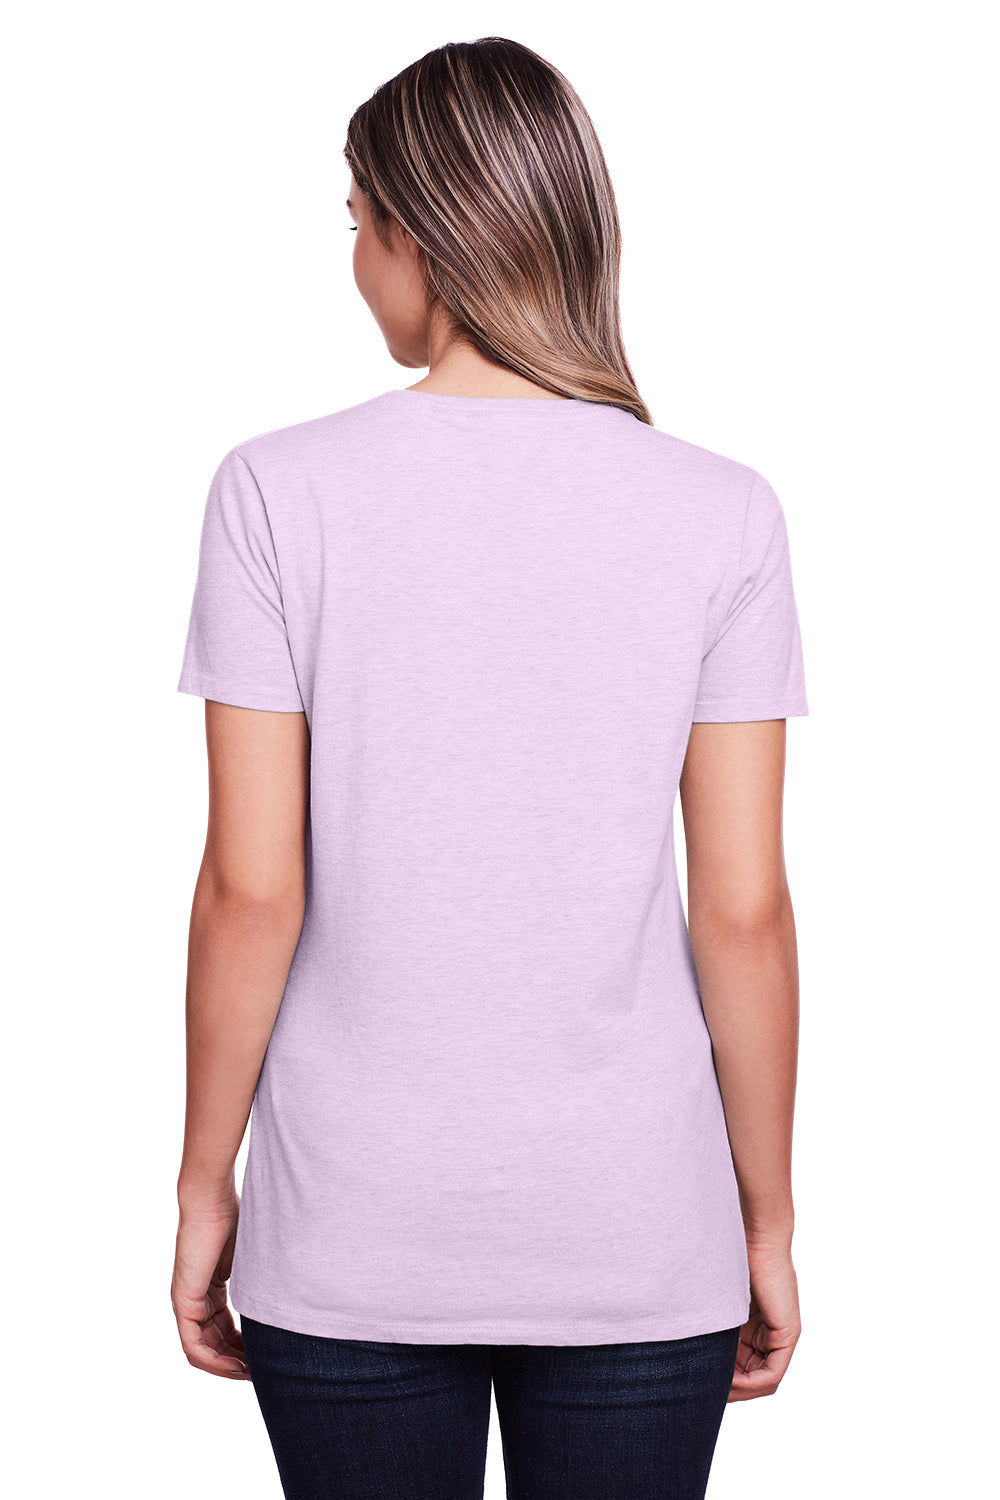 Fruit Of The Loom IC47WR Womens Iconic Short Sleeve Crewneck T-Shirt Heather Pink Back